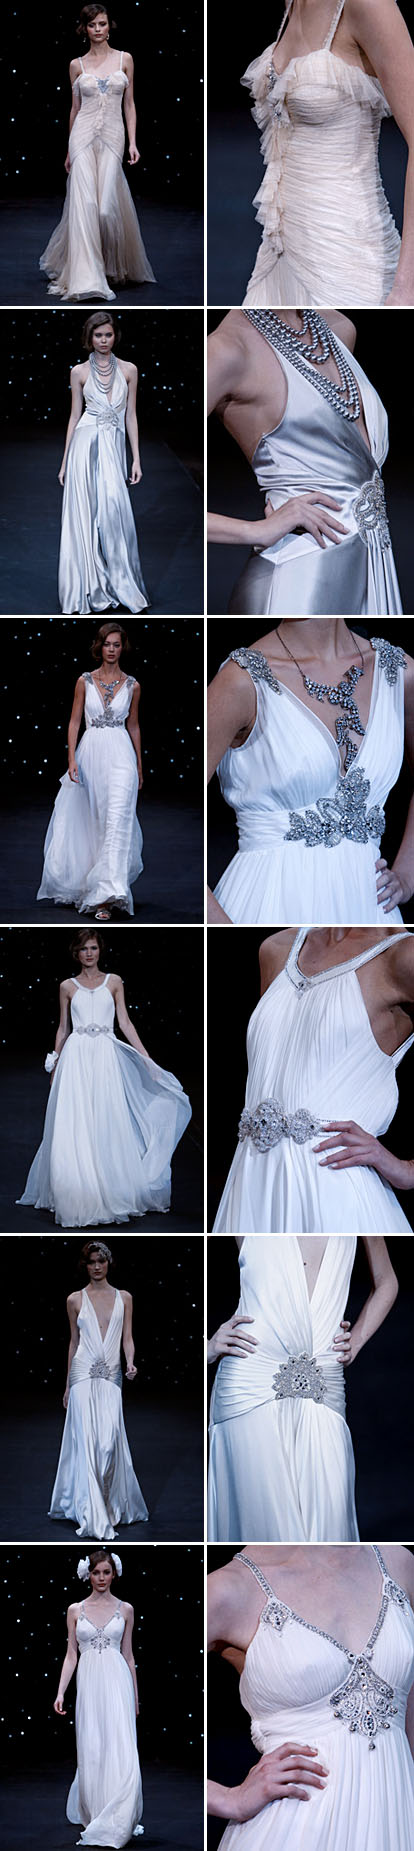 fall 09 wedding gowns from jenny packham